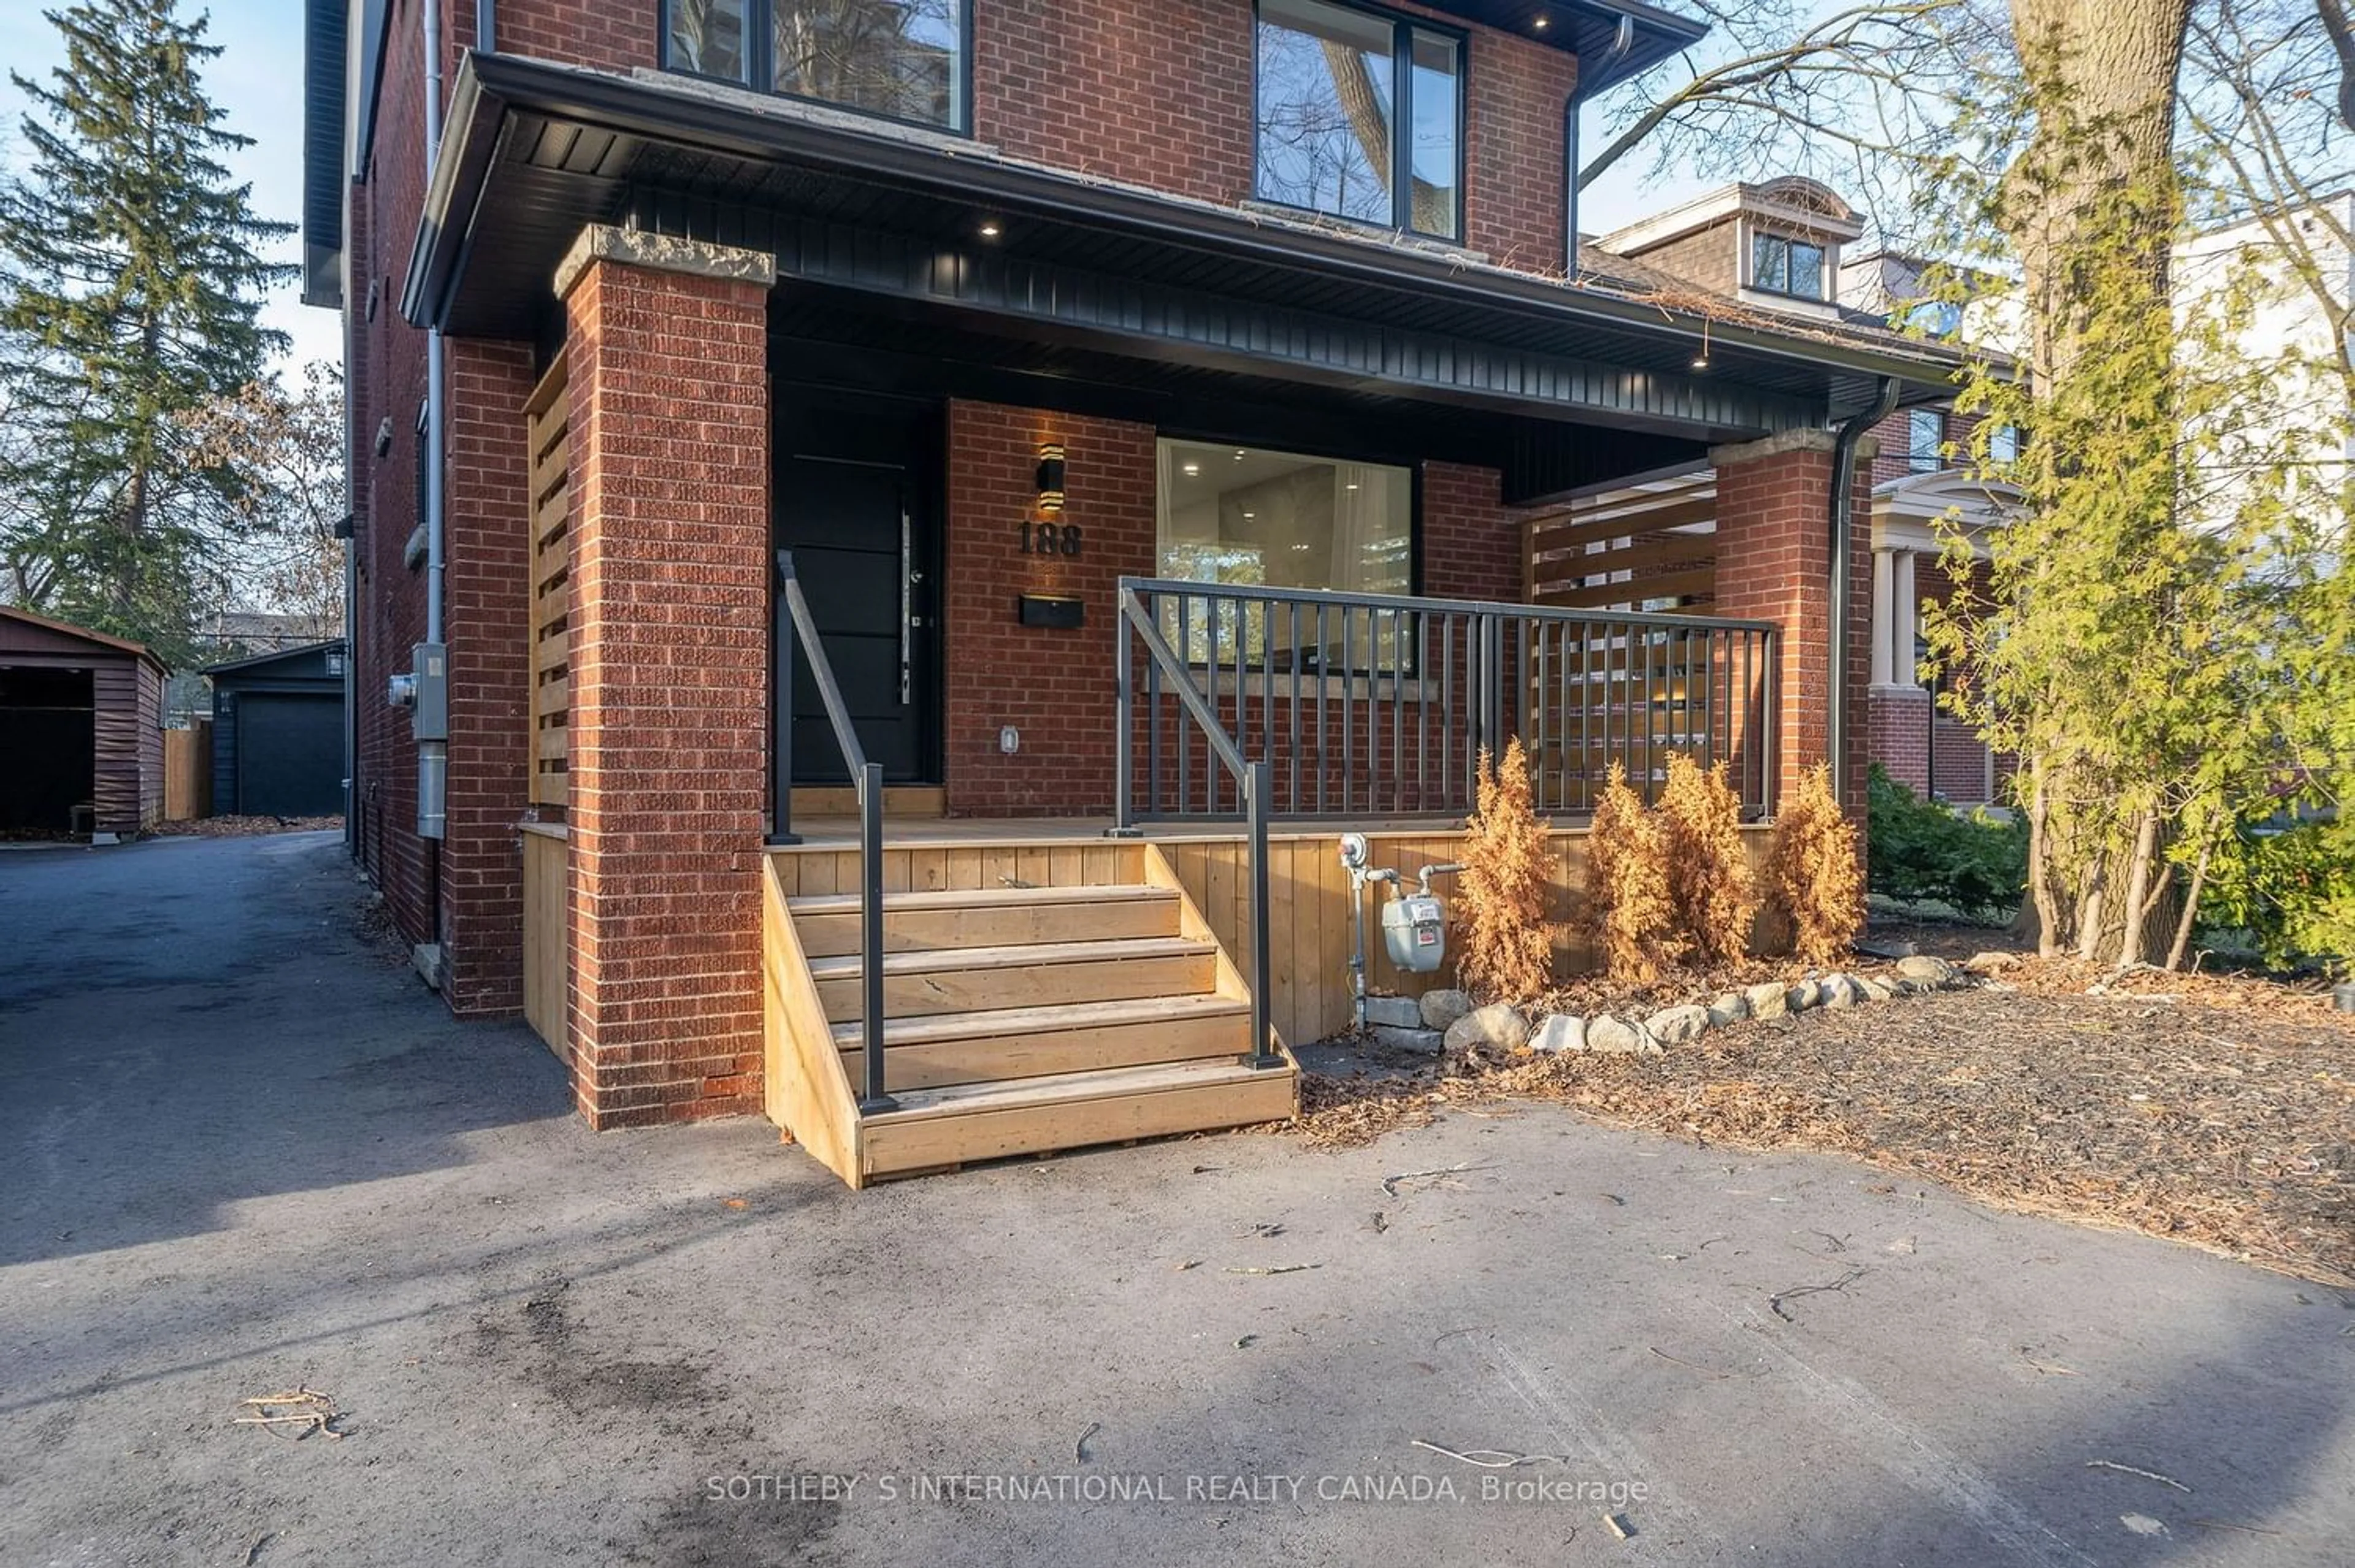 Home with brick exterior material for 188 Keewatin Ave, Toronto Ontario M4P 1Z8